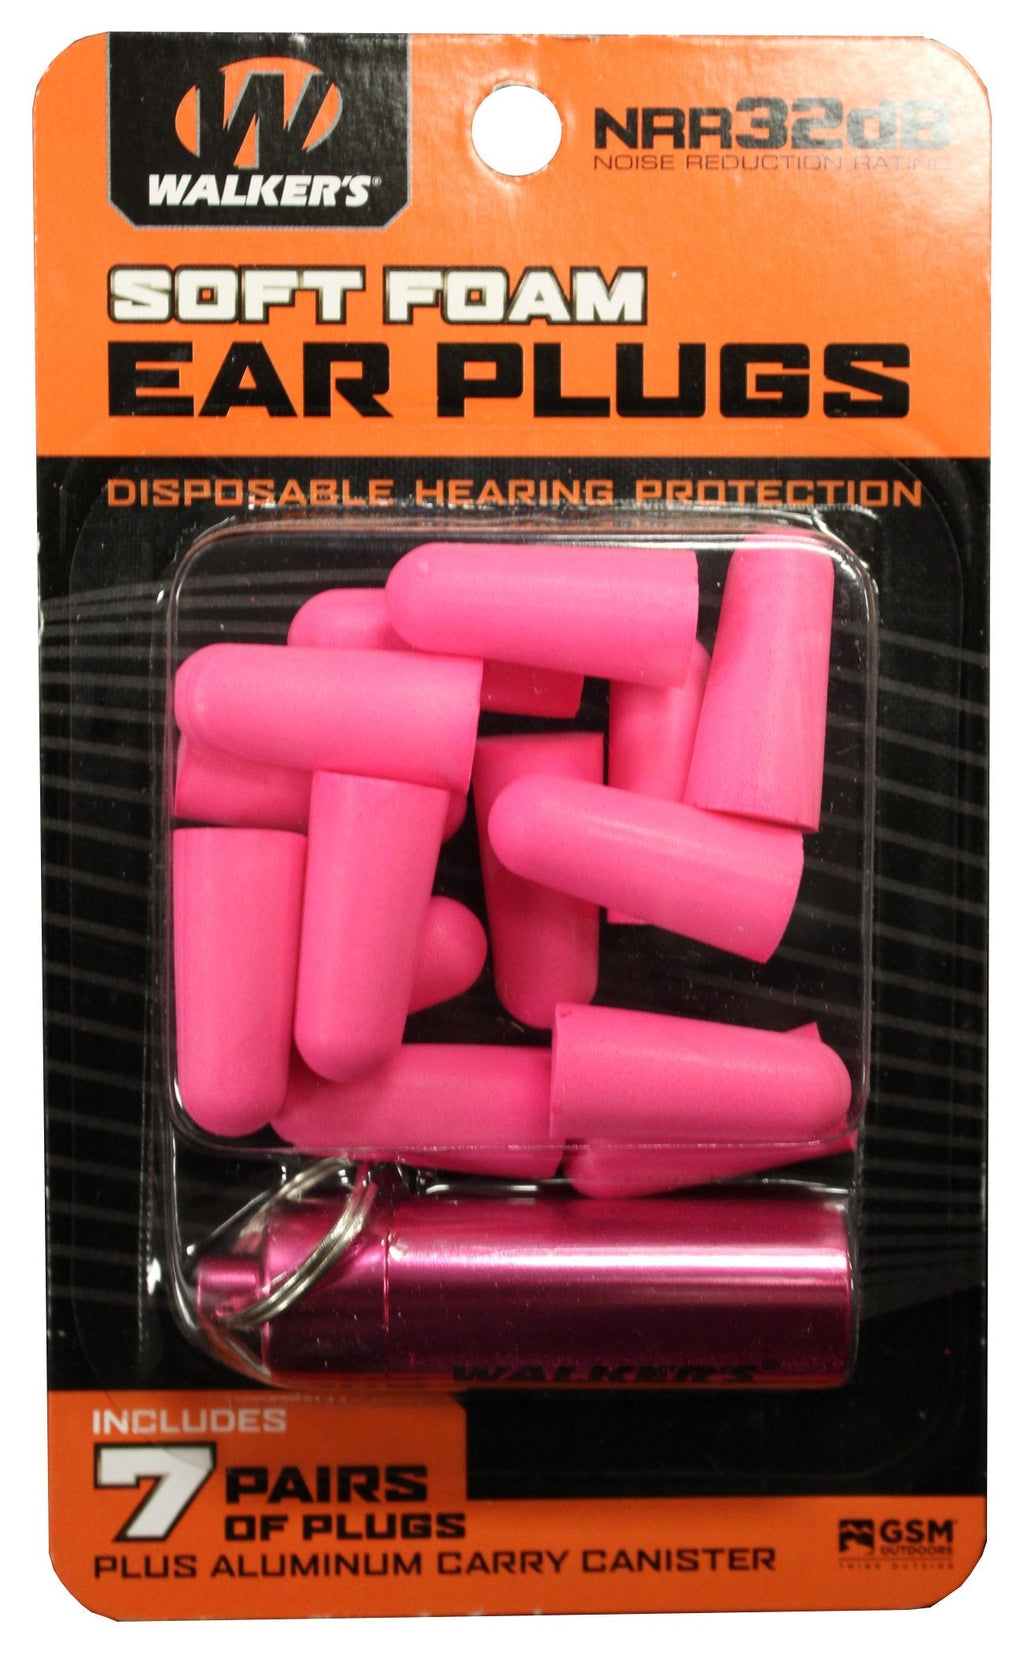 [Australia] - Walker's Soft Foam Disposable Ear Plugs 7 Pair with Metal Carry Canister NRR32 Pink 